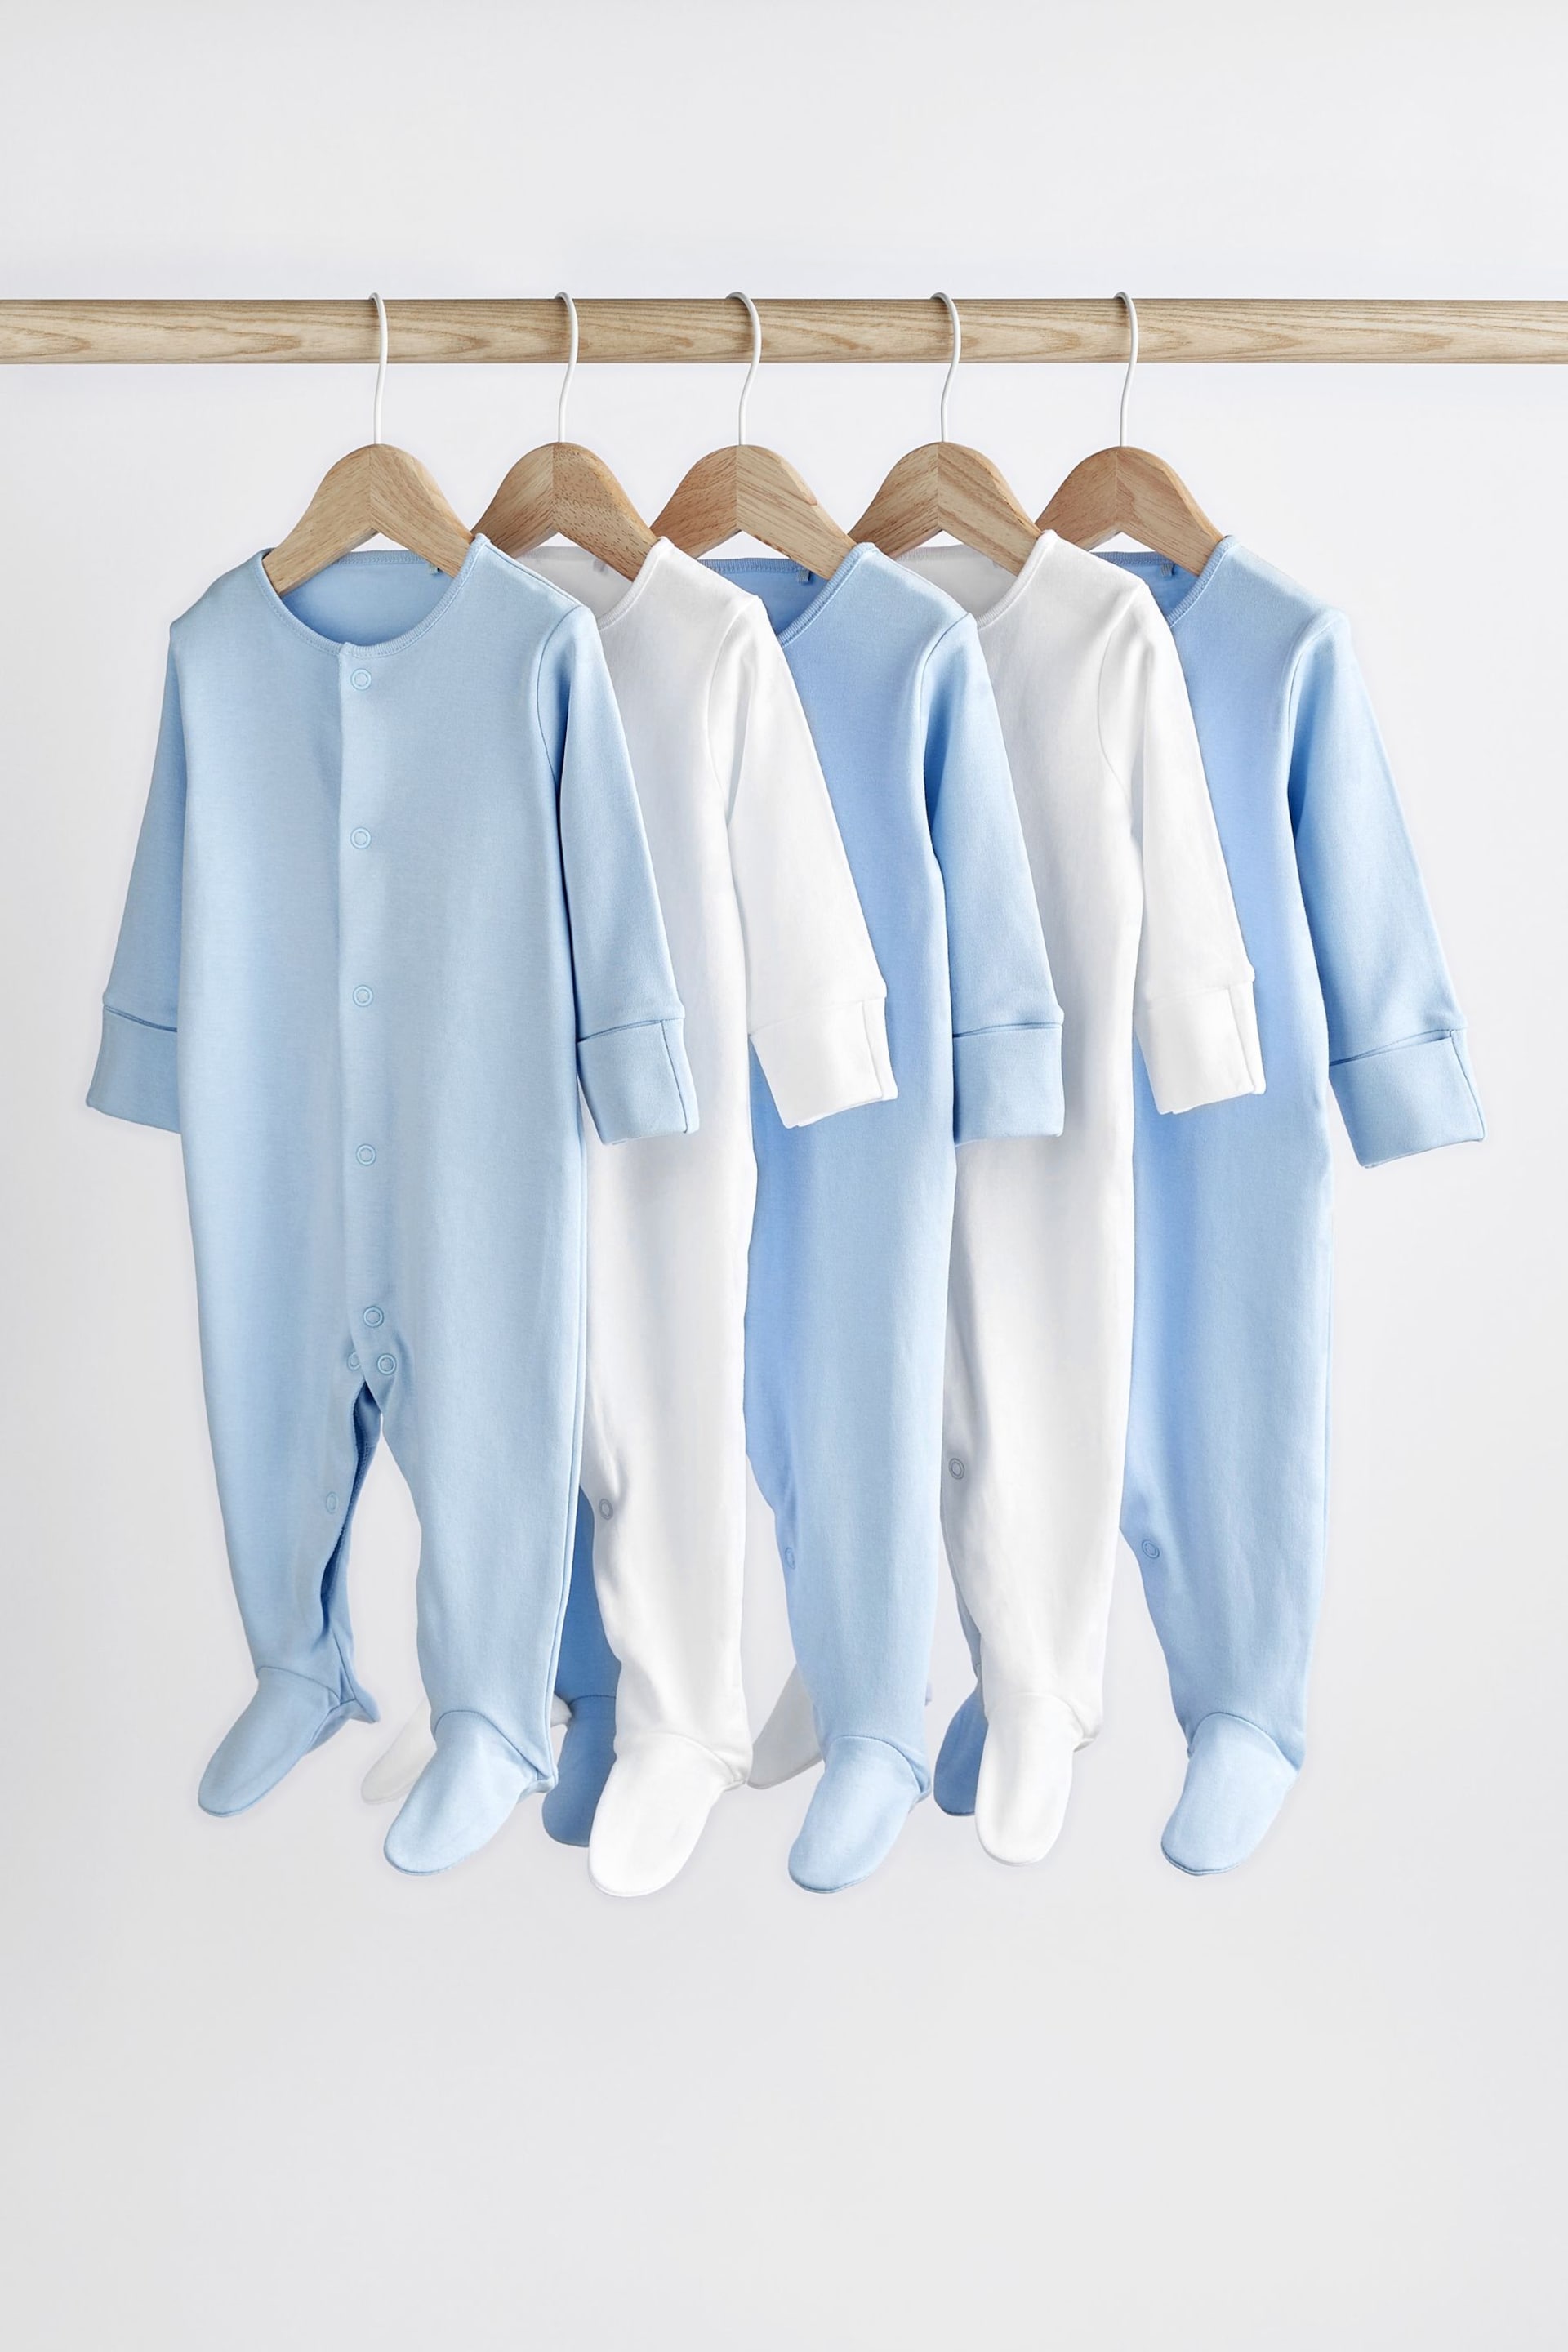 Blue/White 5 Pack Cotton Baby Sleepsuits (0-2yrs) - Image 1 of 7